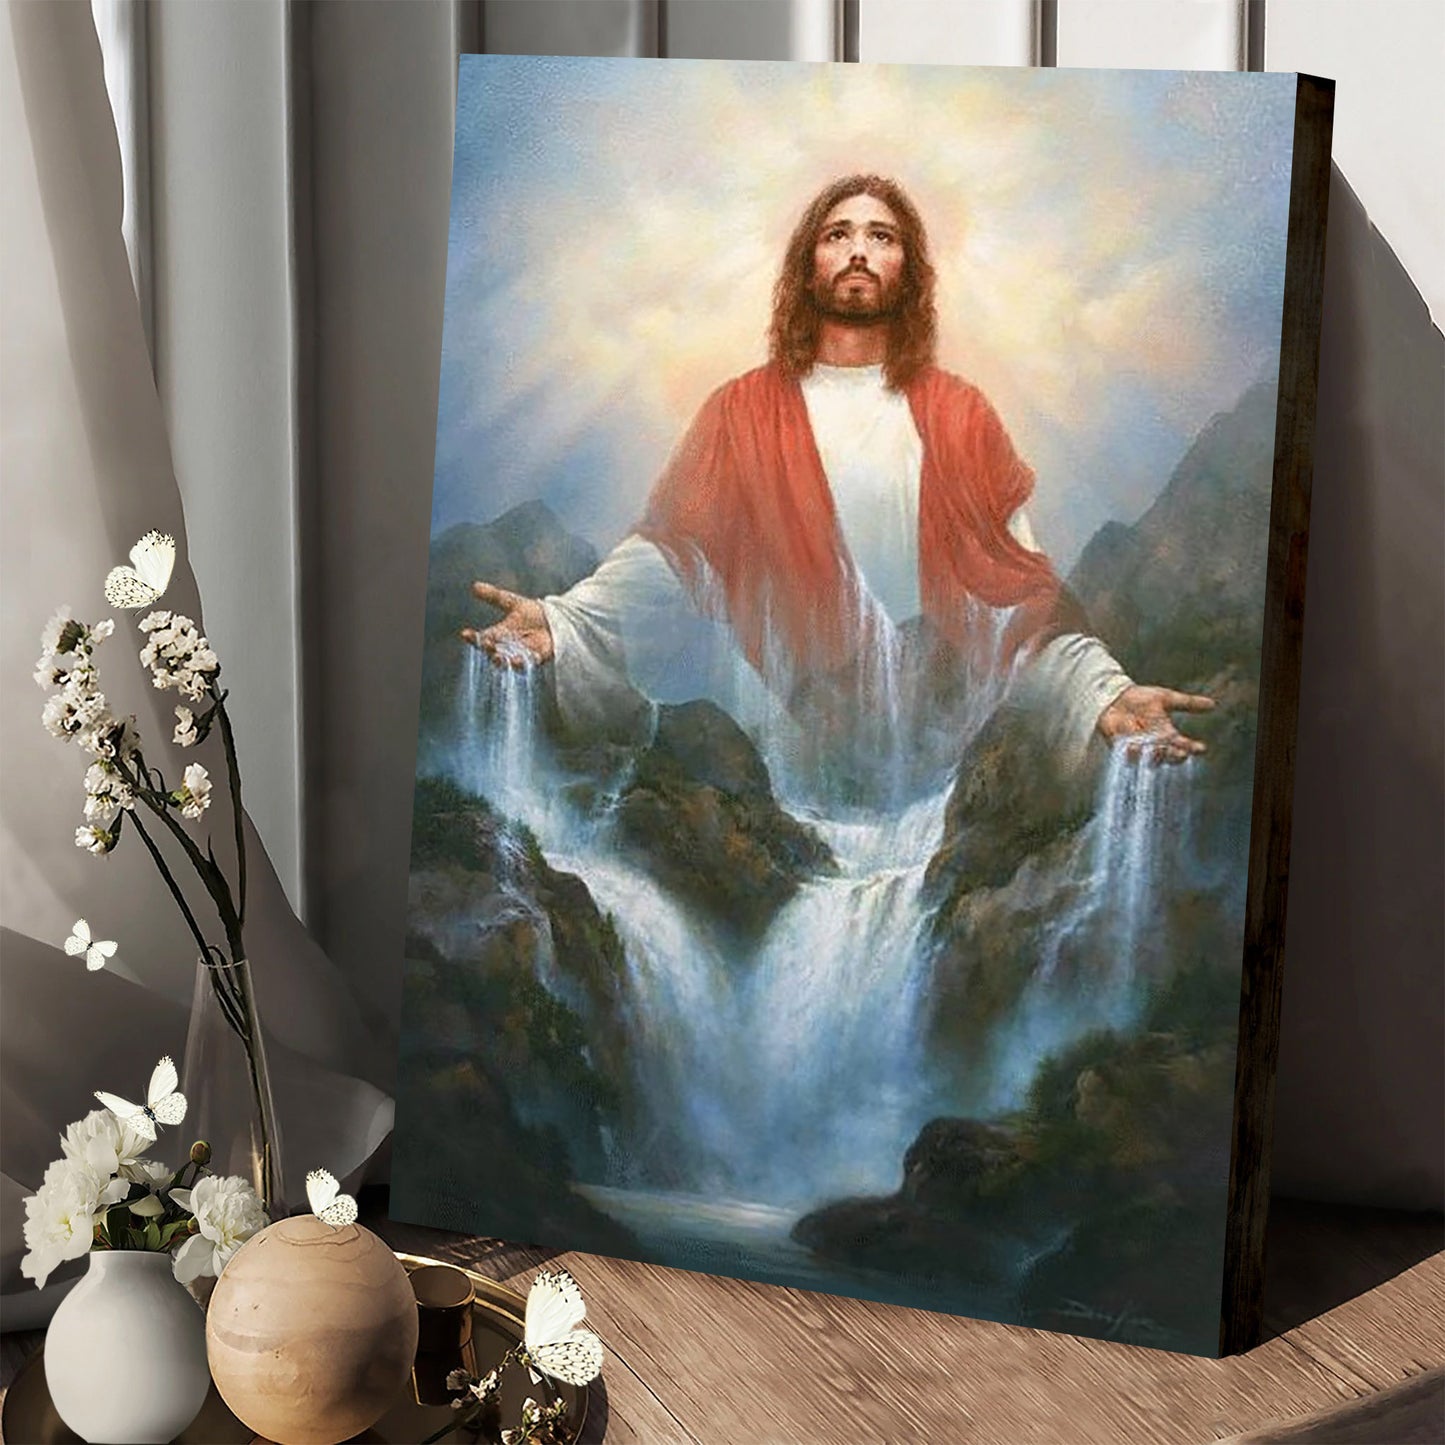 Jesus With Open Arms On The Mountain Canvas Prints - Jesus Christ Art - Christian Canvas Wall Decor